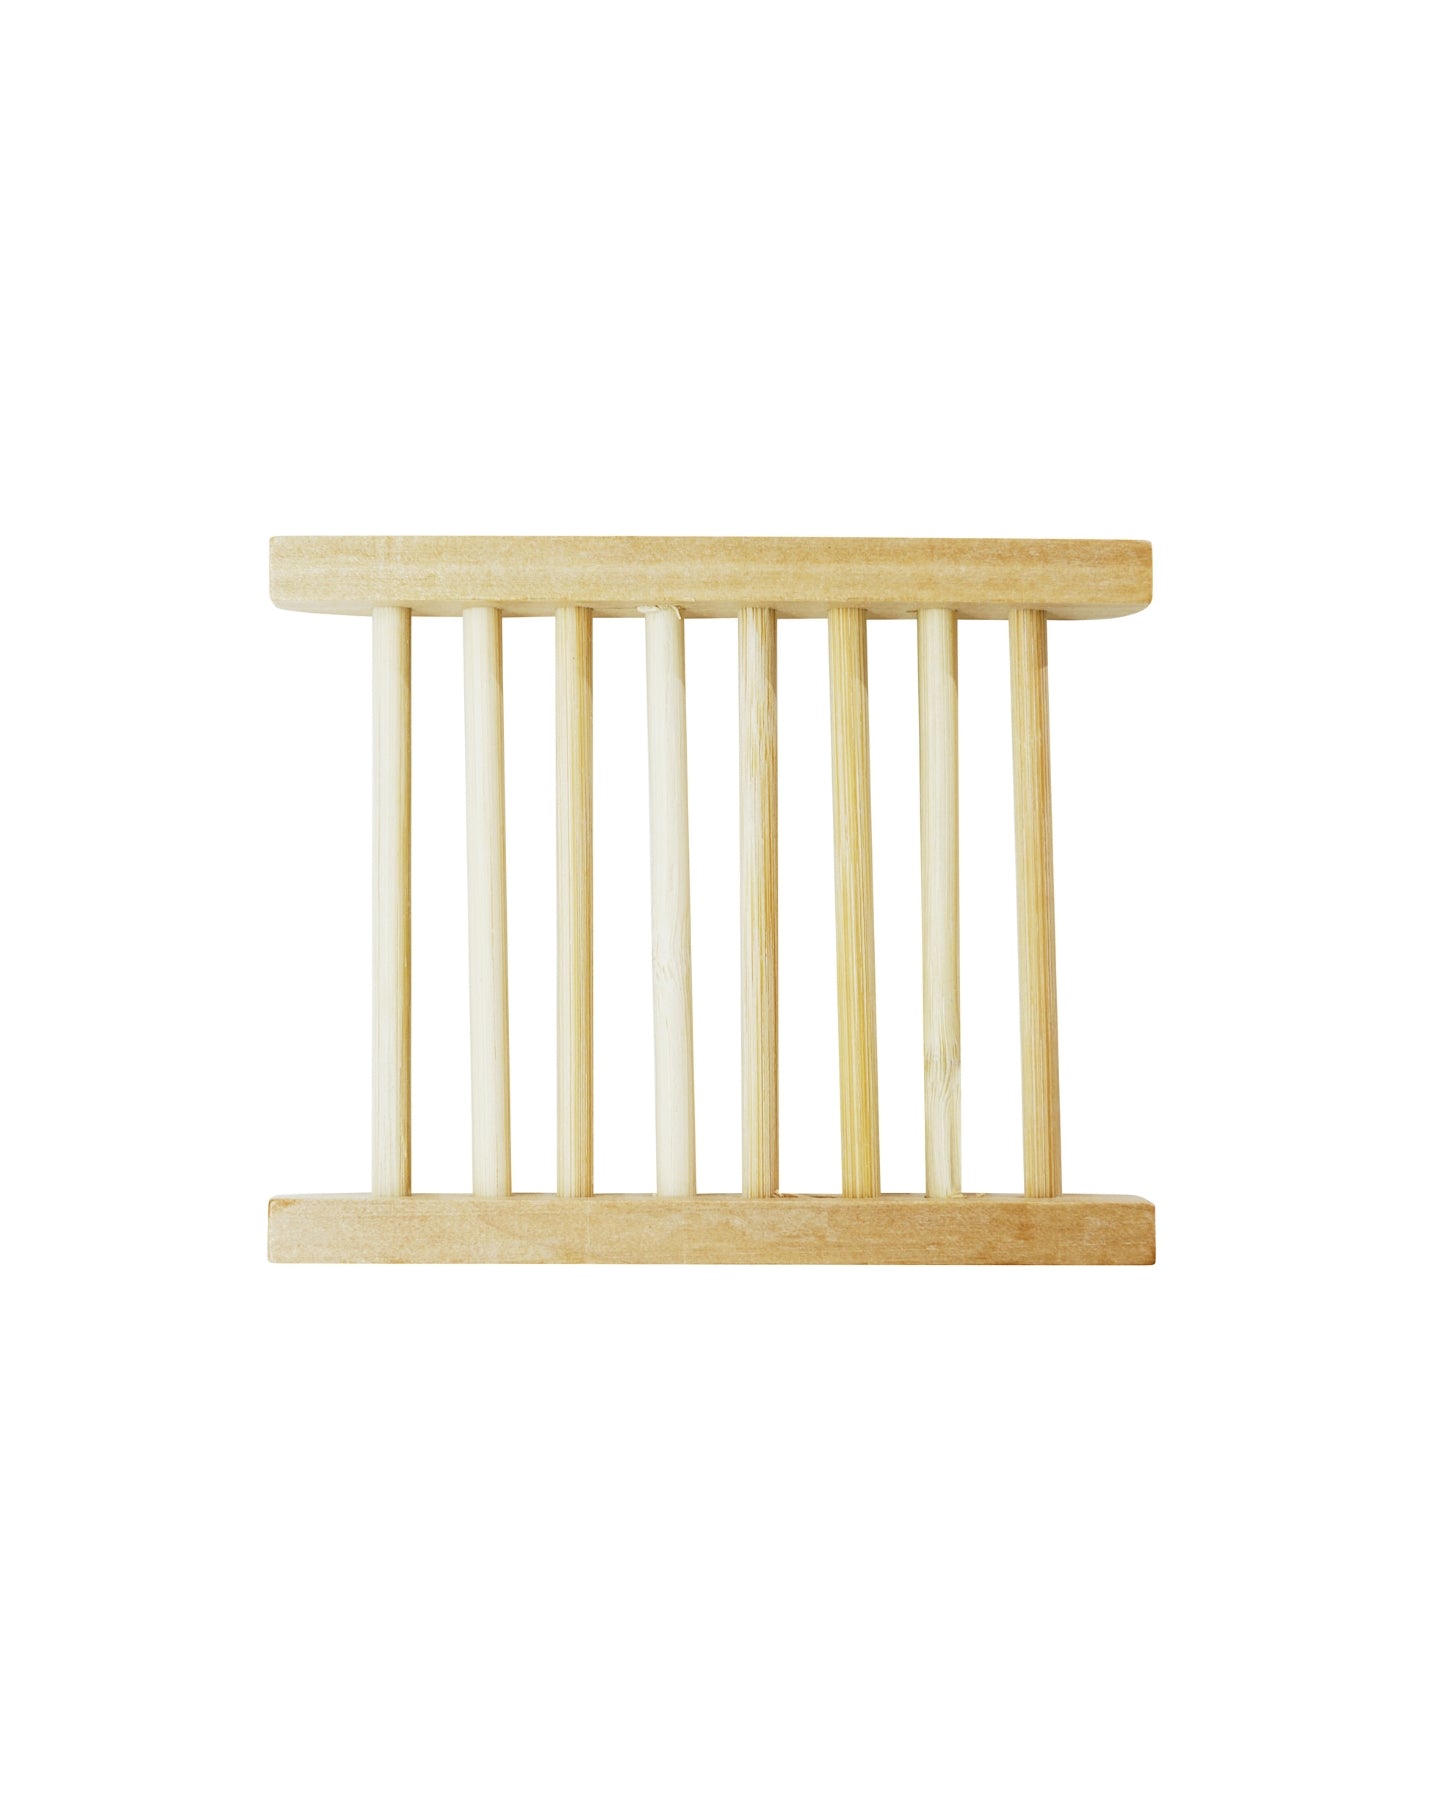 Bamboo Soap Holder against a white background.